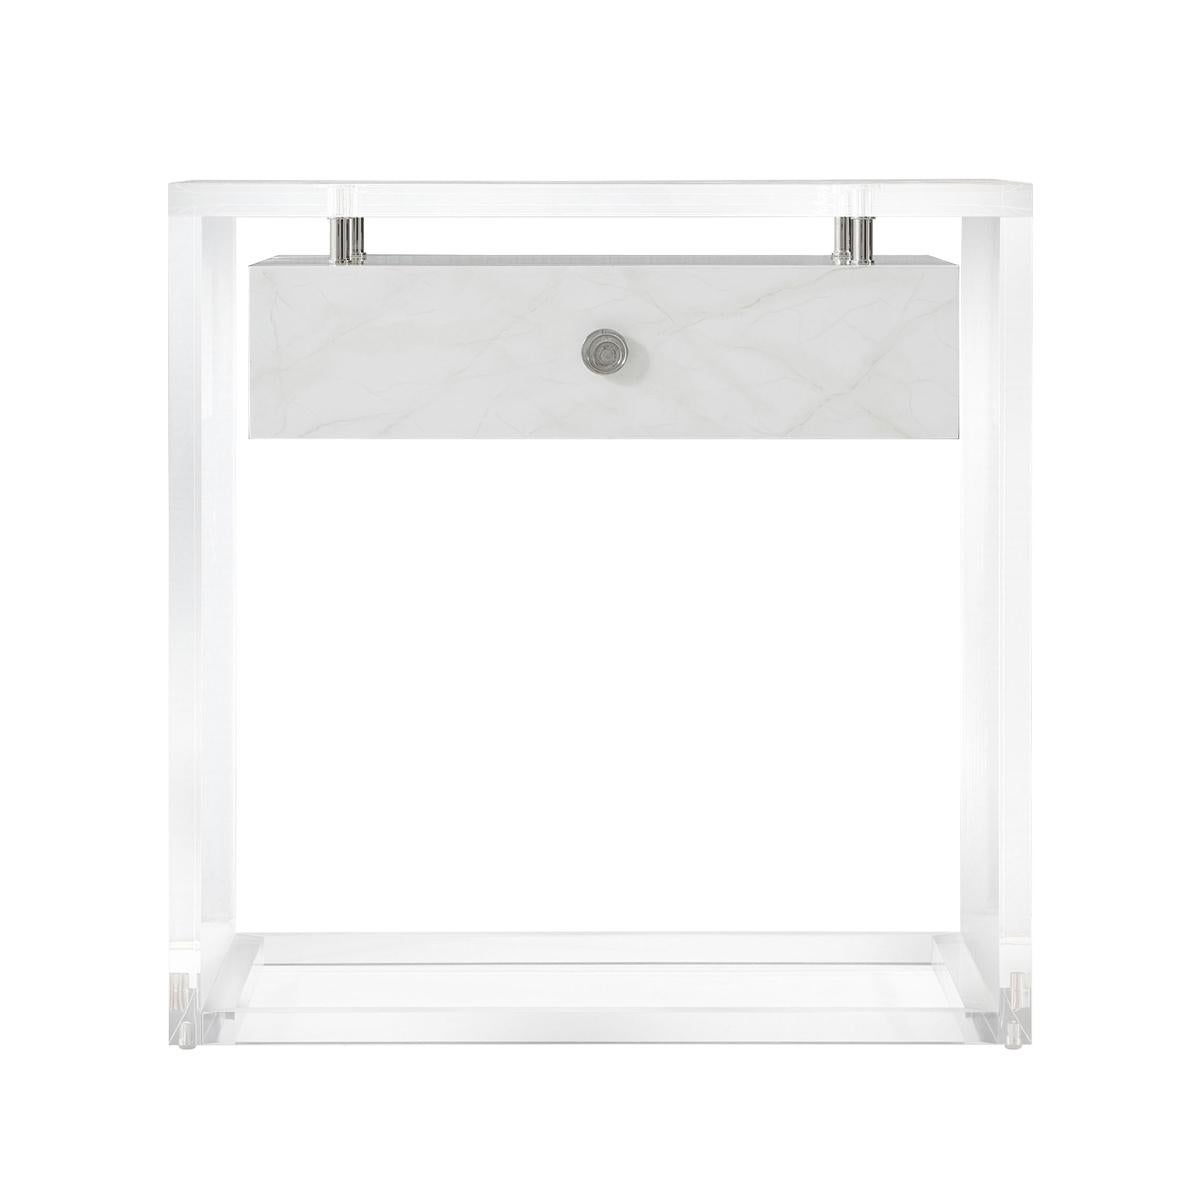 With solid acrylic top and sides and a framed acrylic base, with stainless steel exposed hardware and a suspended faux Carrara marble lacquered soft closing drawer.
Dimensions: 26